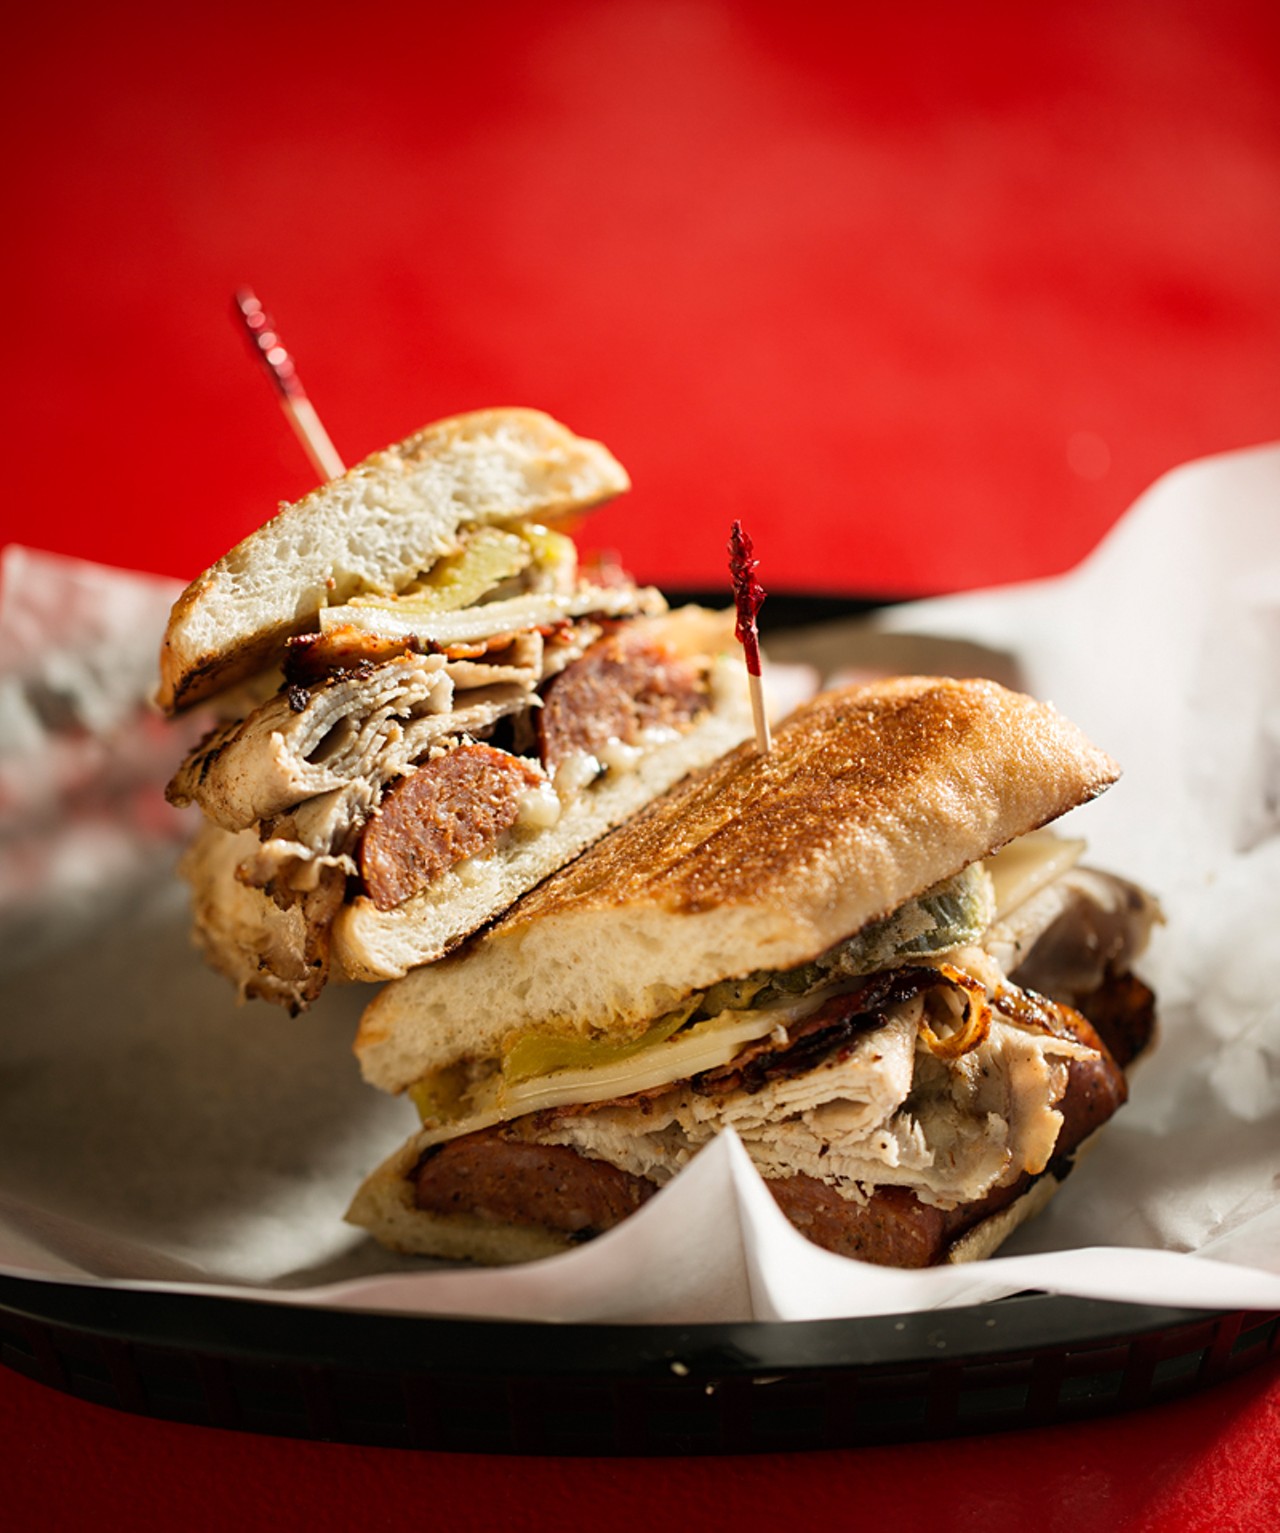 The Pat "Say Jack" is grilled andouille, roasted pork loin, jalapeno bacon, Swiss and pepper jack cheese, with stone ground mustard, fried pickles and fried banana peppers.